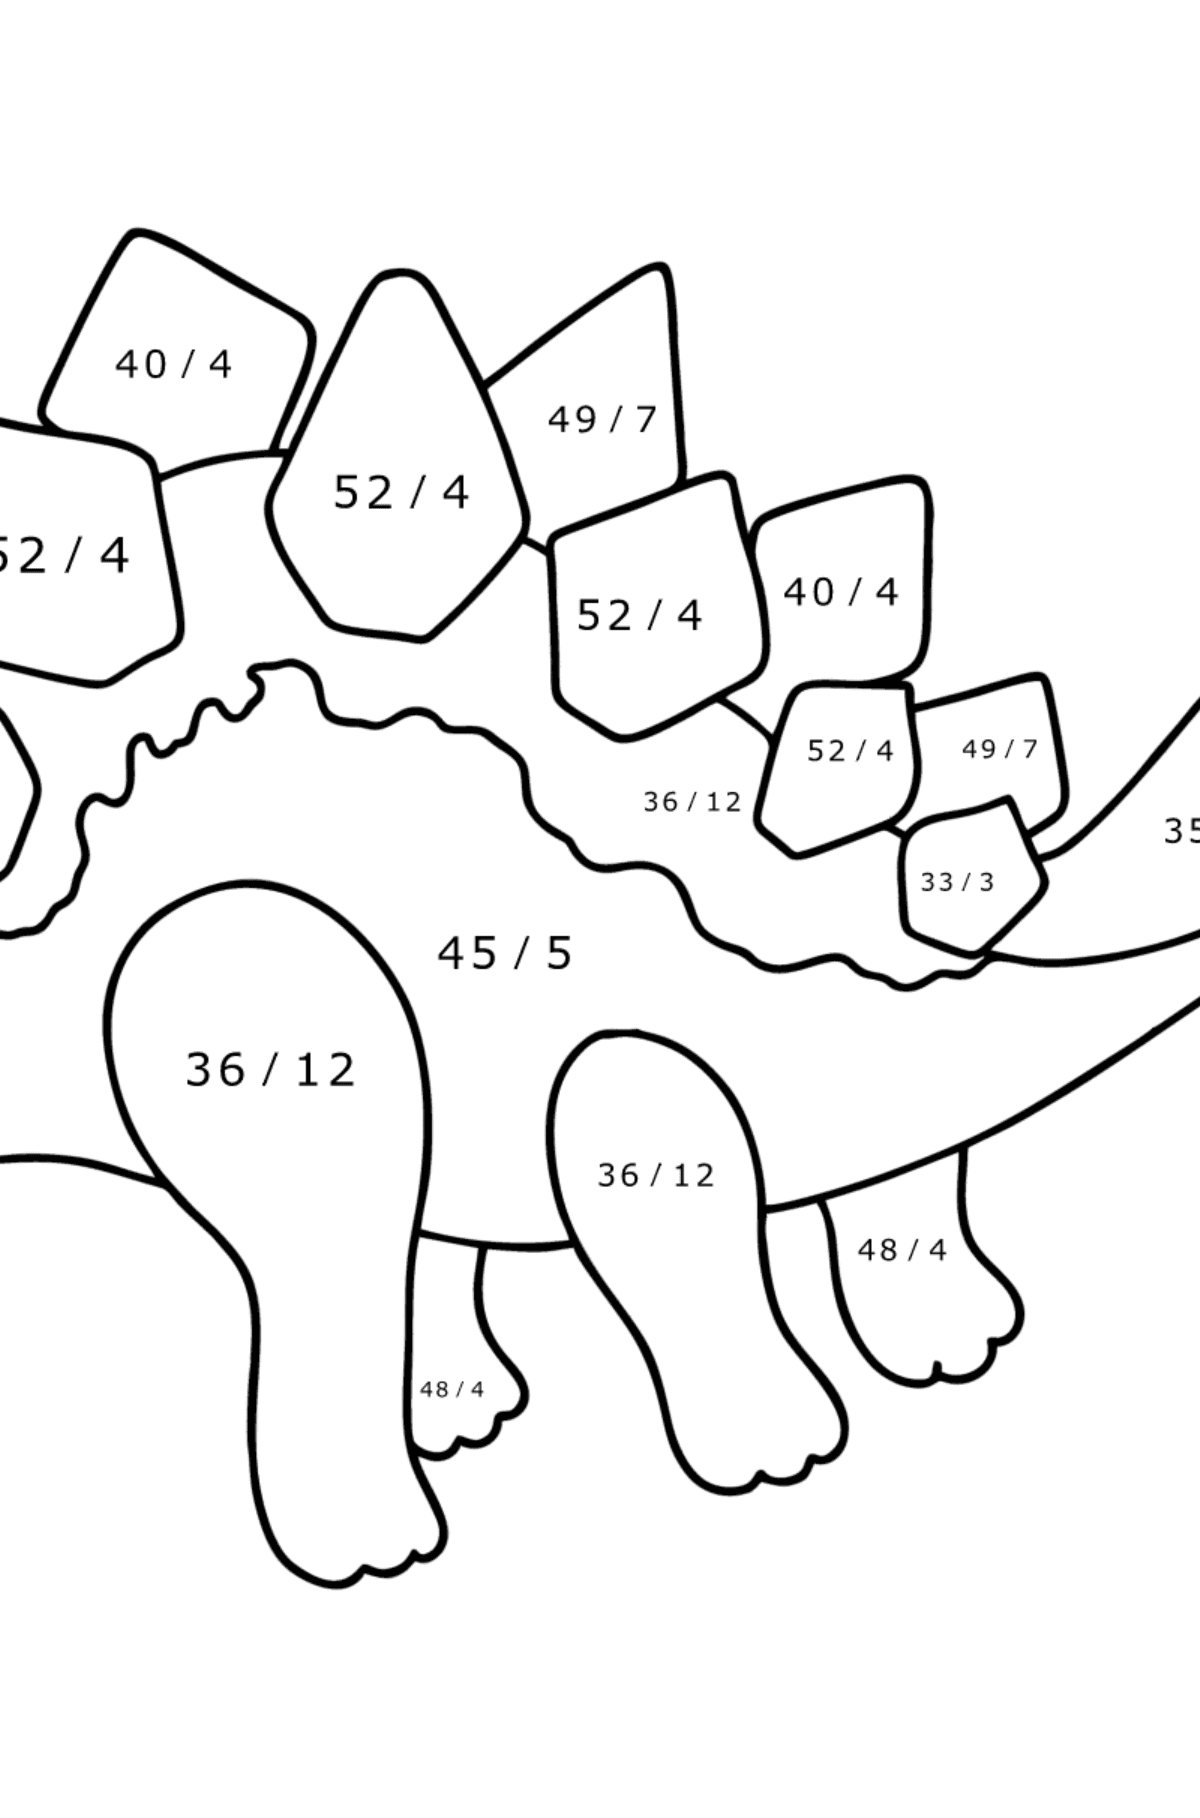 Stegosaurus coloring page - Math Coloring - Division for Kids